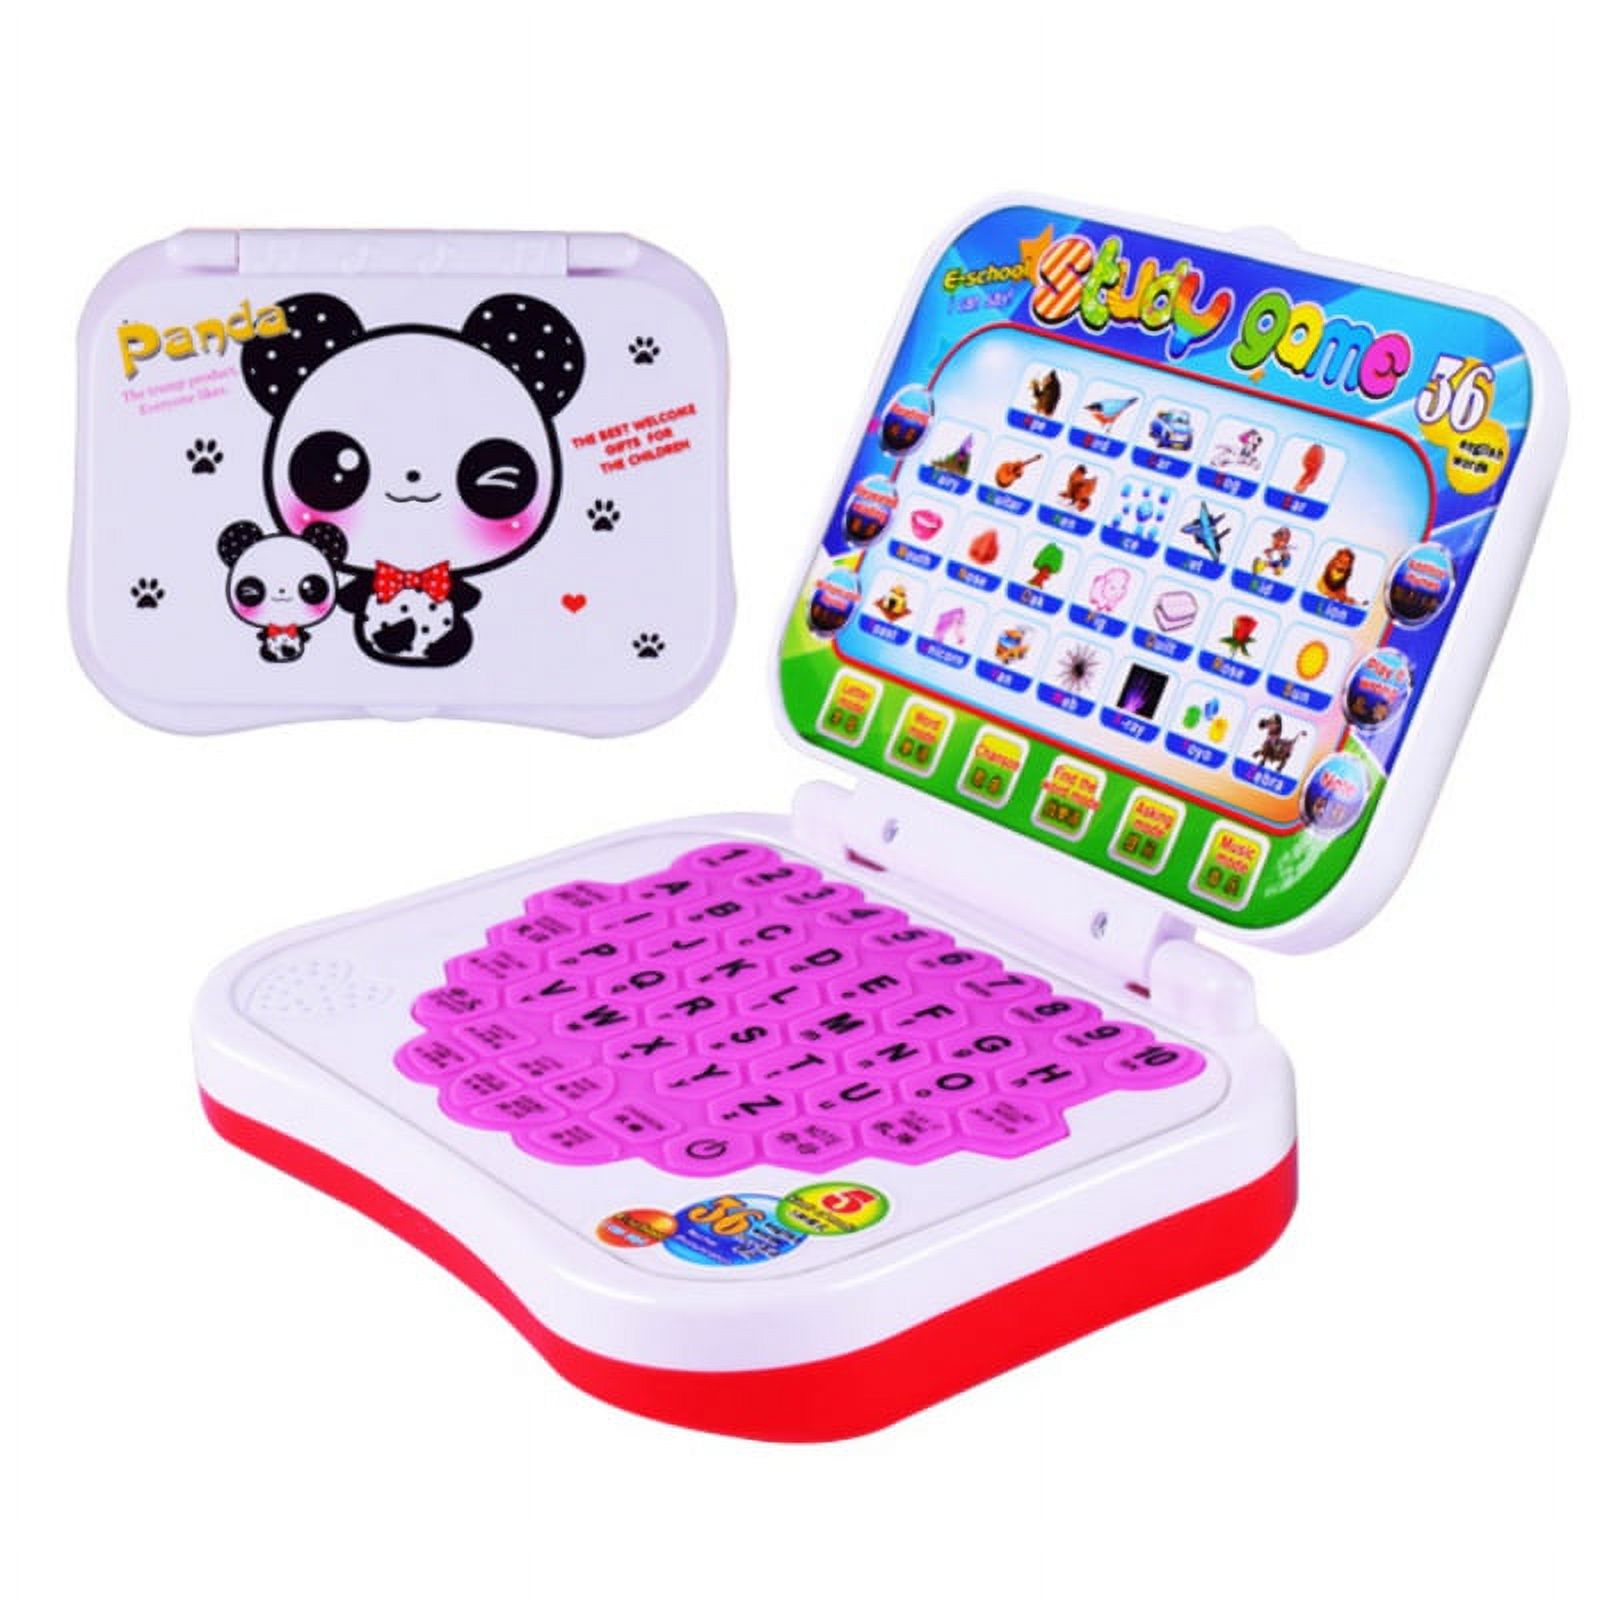 Toy Computer Laptop Tablet Baby Children Educational Learning Machine Toys Electronic Kids Study Game - image 2 of 14